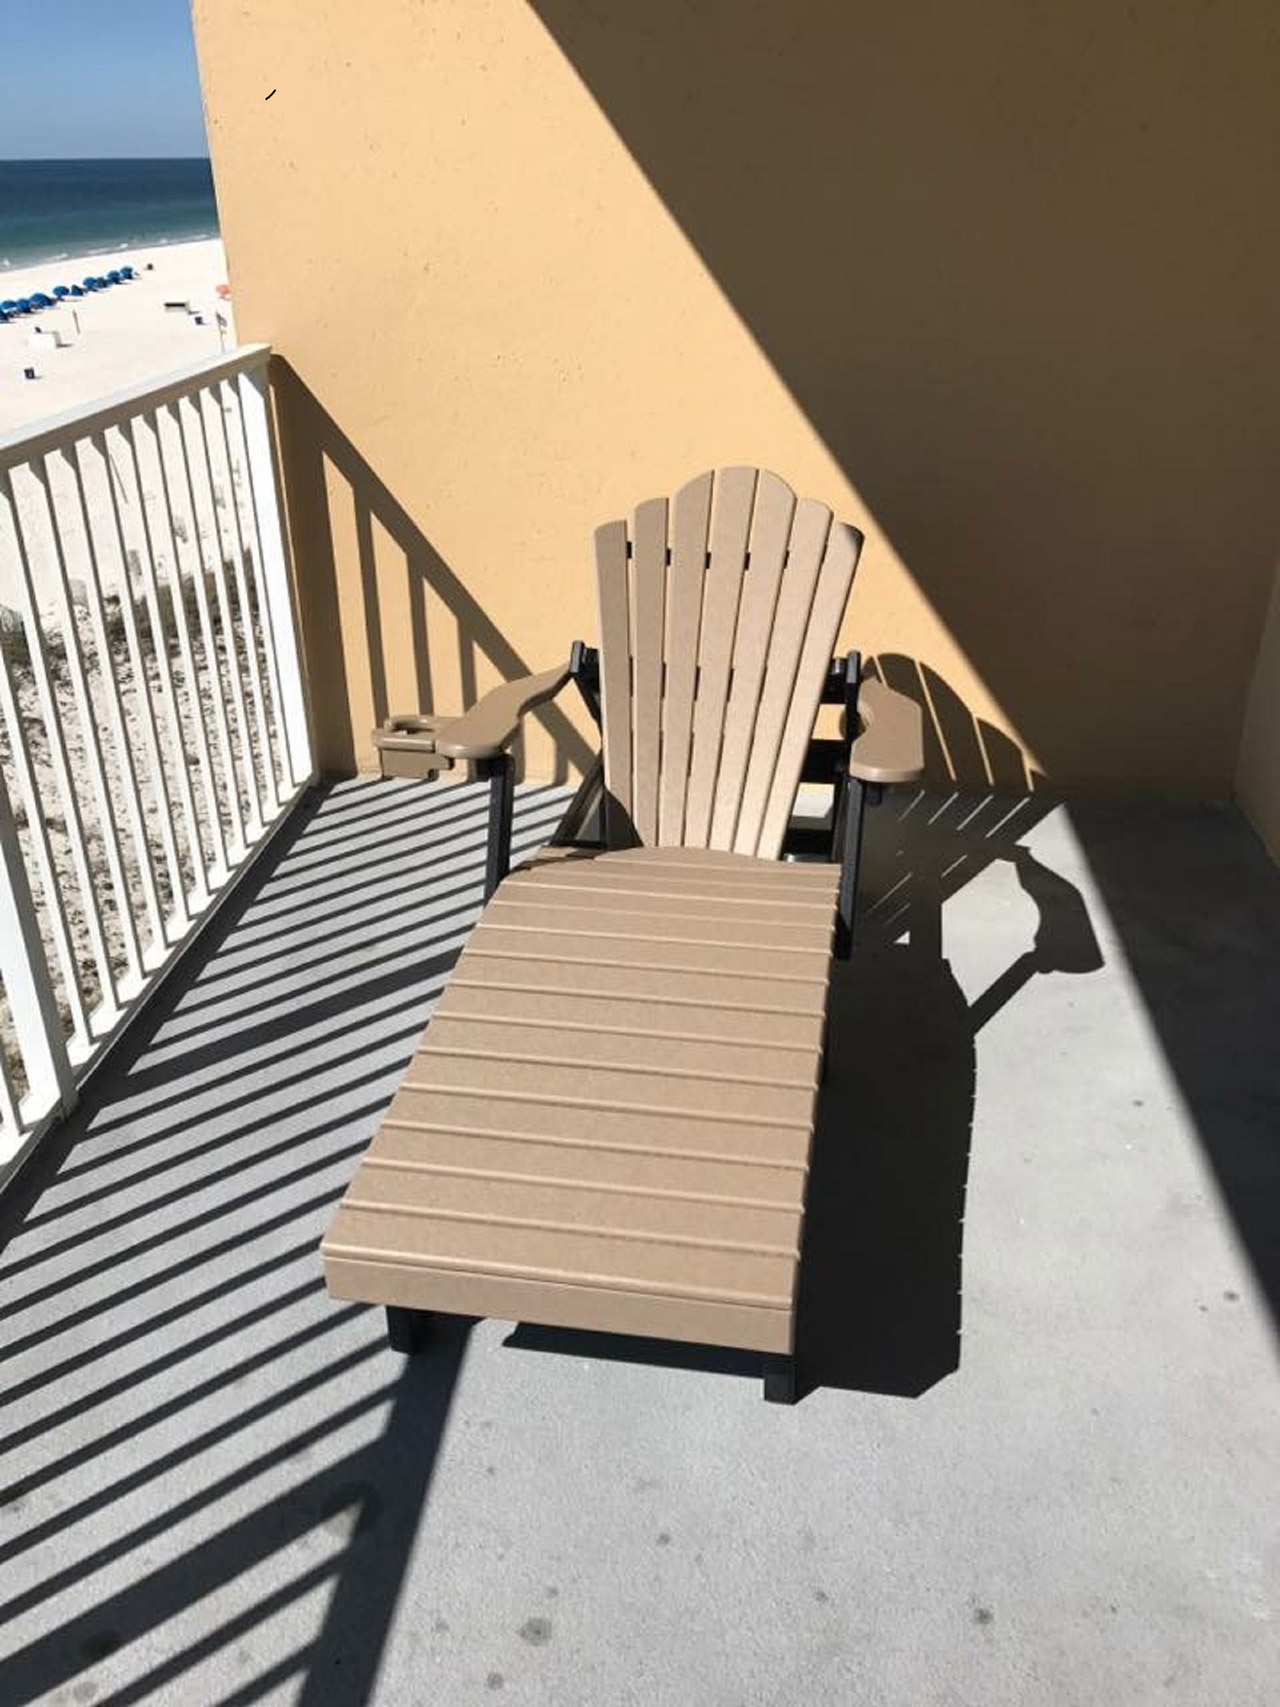 Balcony Lounge Chair at Gulf Shores Condo Rental